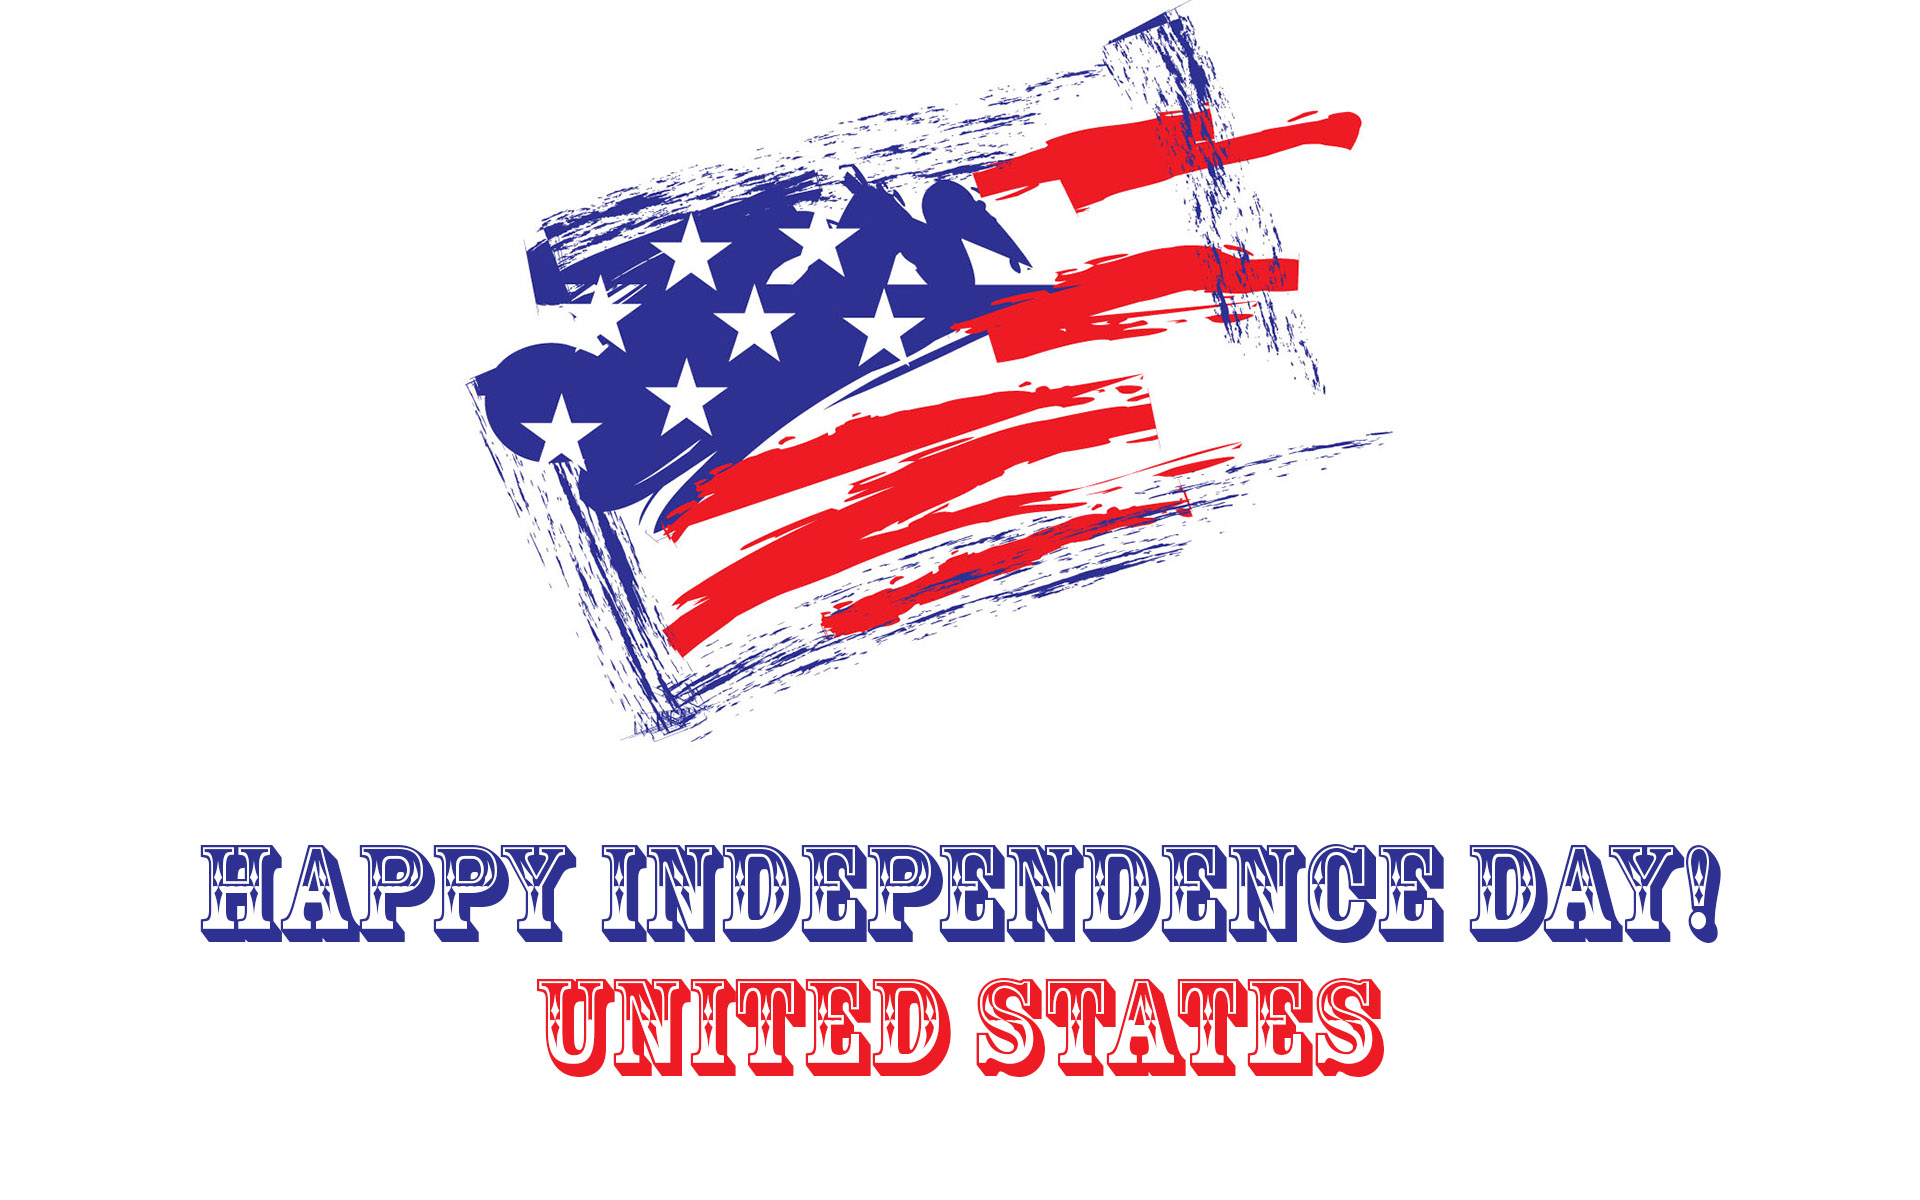 USA 4th July Independence Day Patriotic Quotes Messages Images